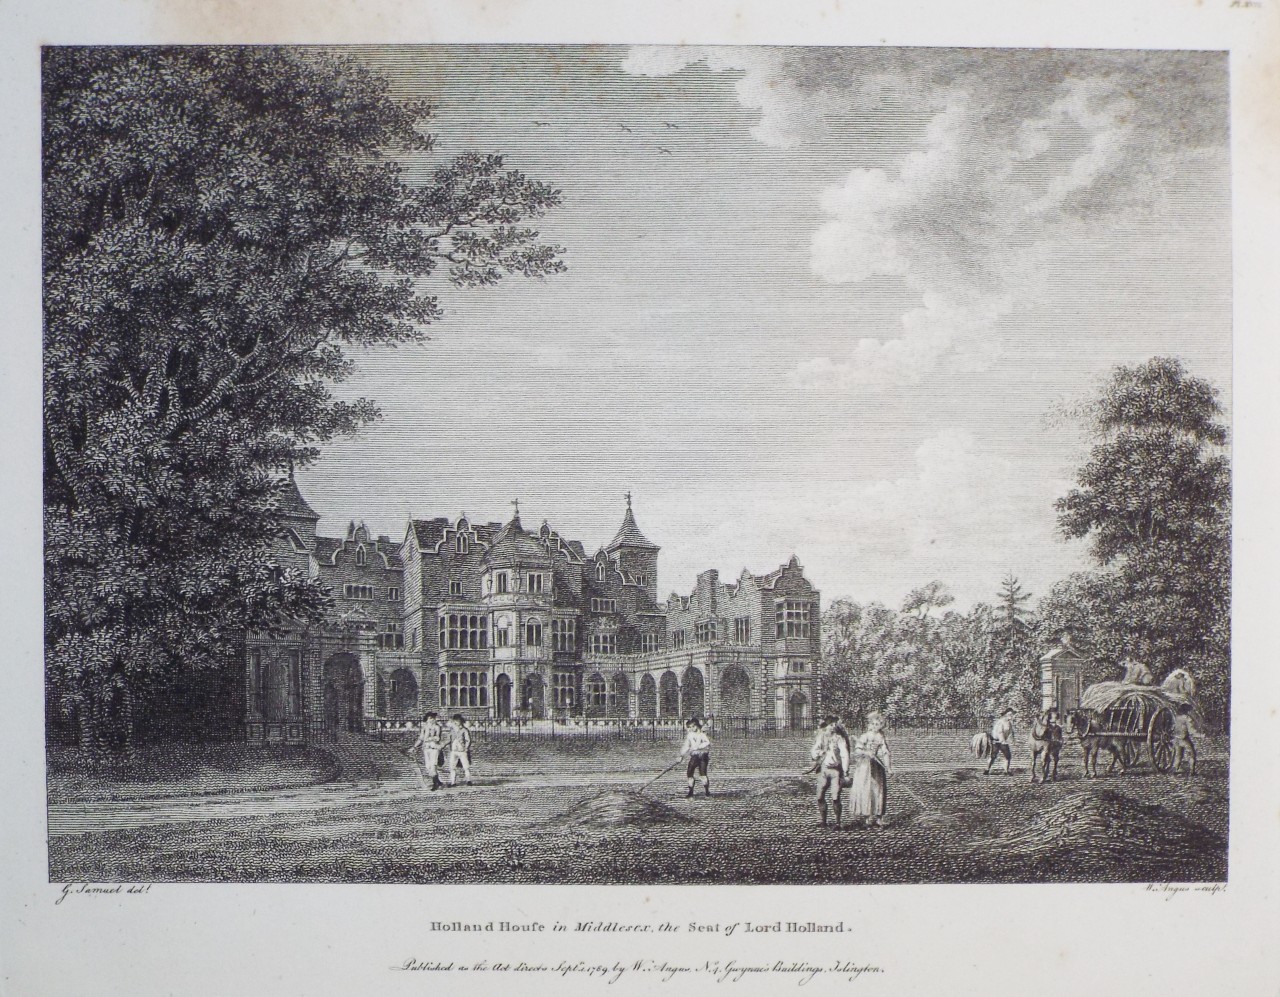 Print - Holland House in Middlesex, the Seat of Lord Holland. - Angus